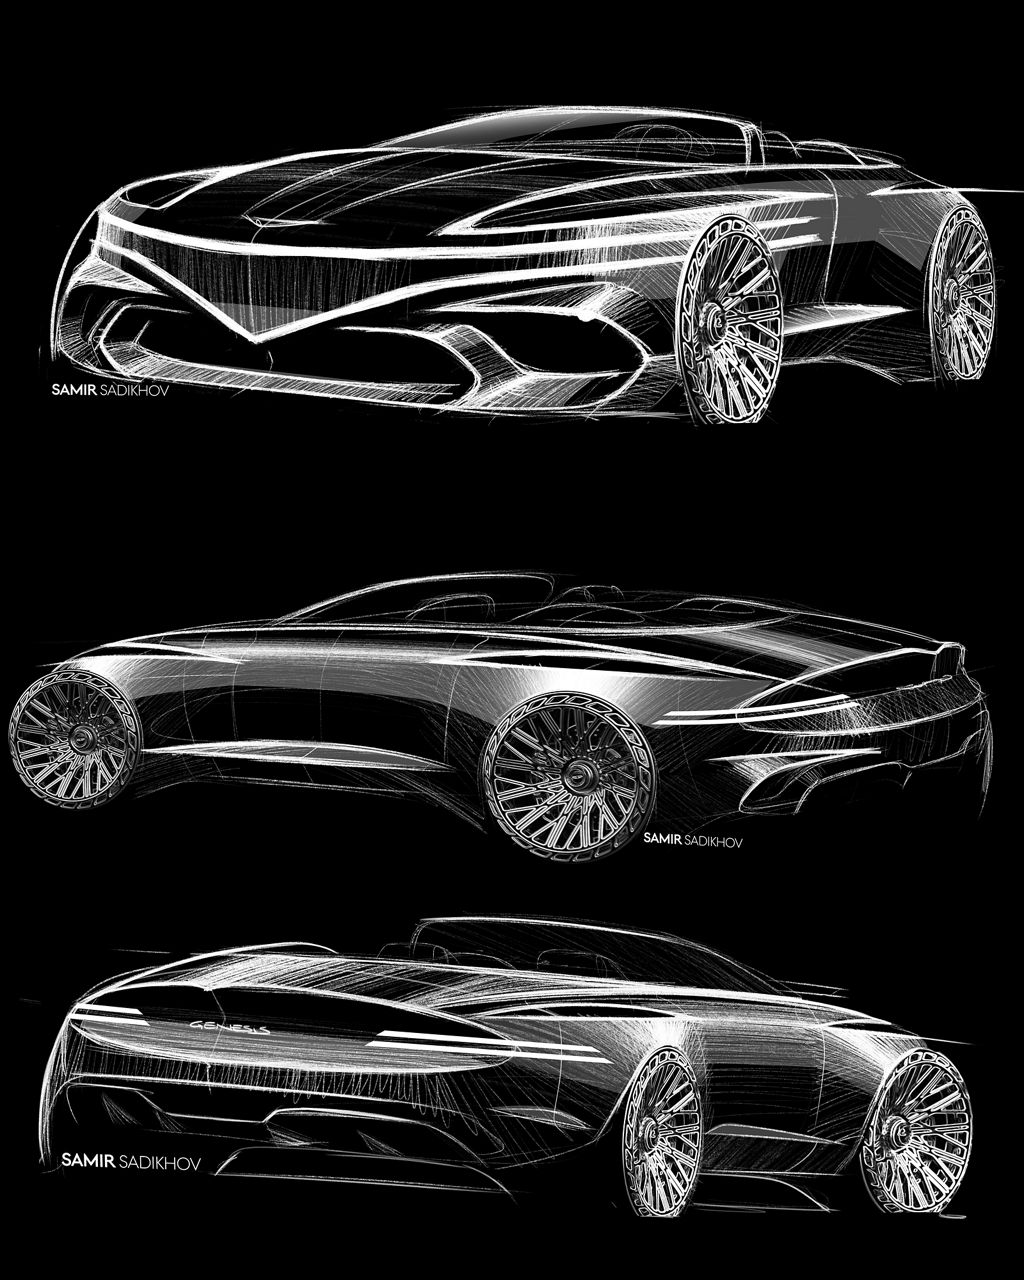 Three concept drawings of the Genesis X Convertible